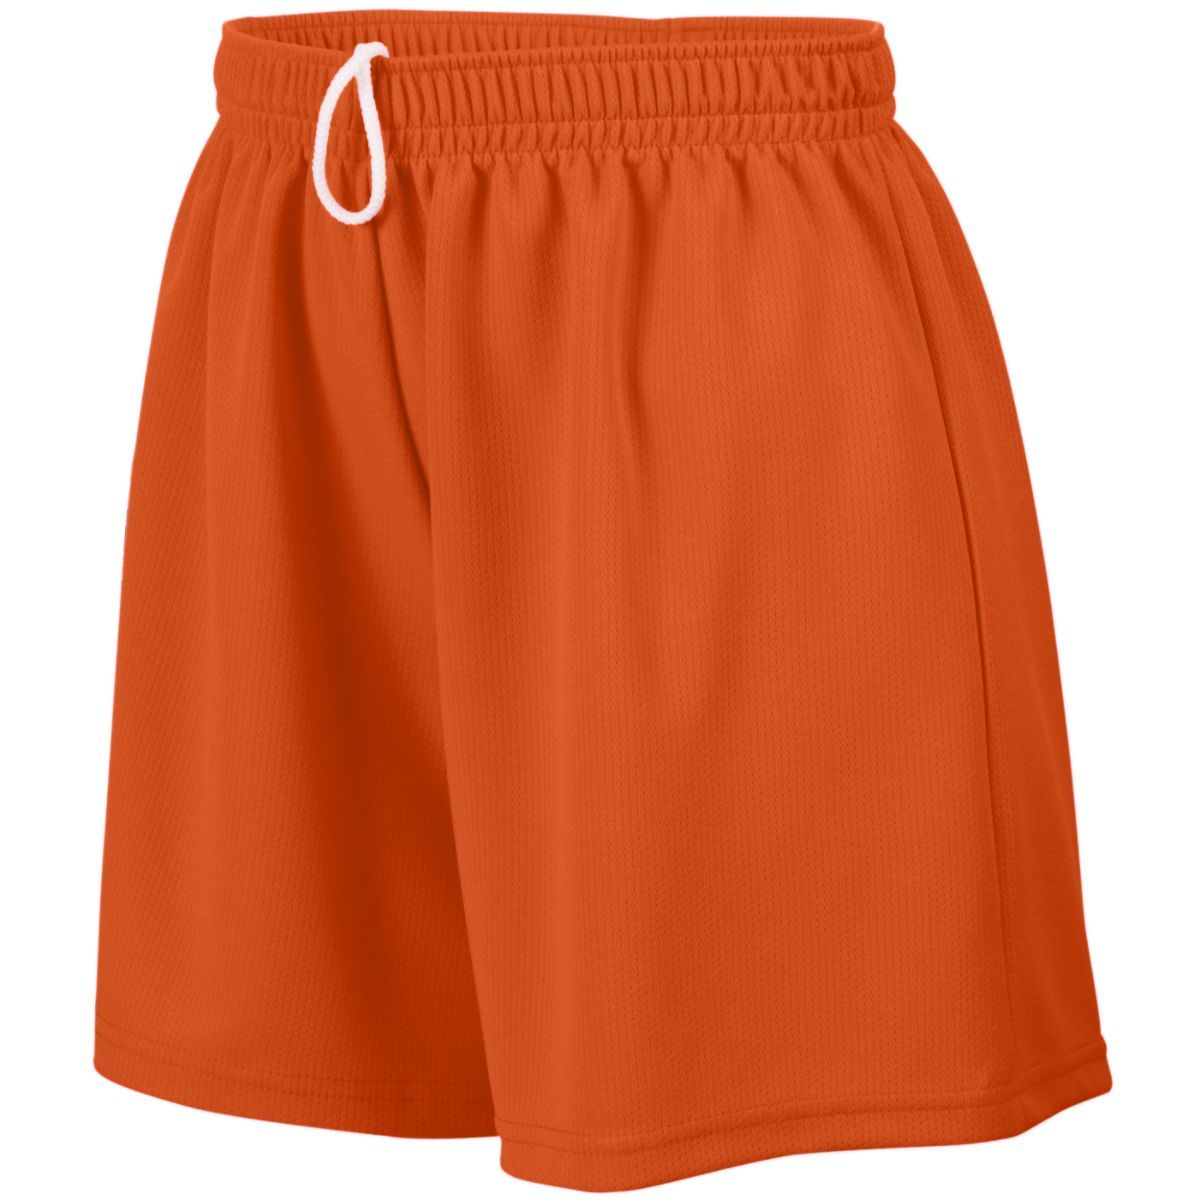 Augusta Sportswear Ladies Wicking Mesh Shorts in Orange  -Part of the Ladies, Ladies-Shorts, Augusta-Products, Lacrosse, All-Sports, All-Sports-1 product lines at KanaleyCreations.com